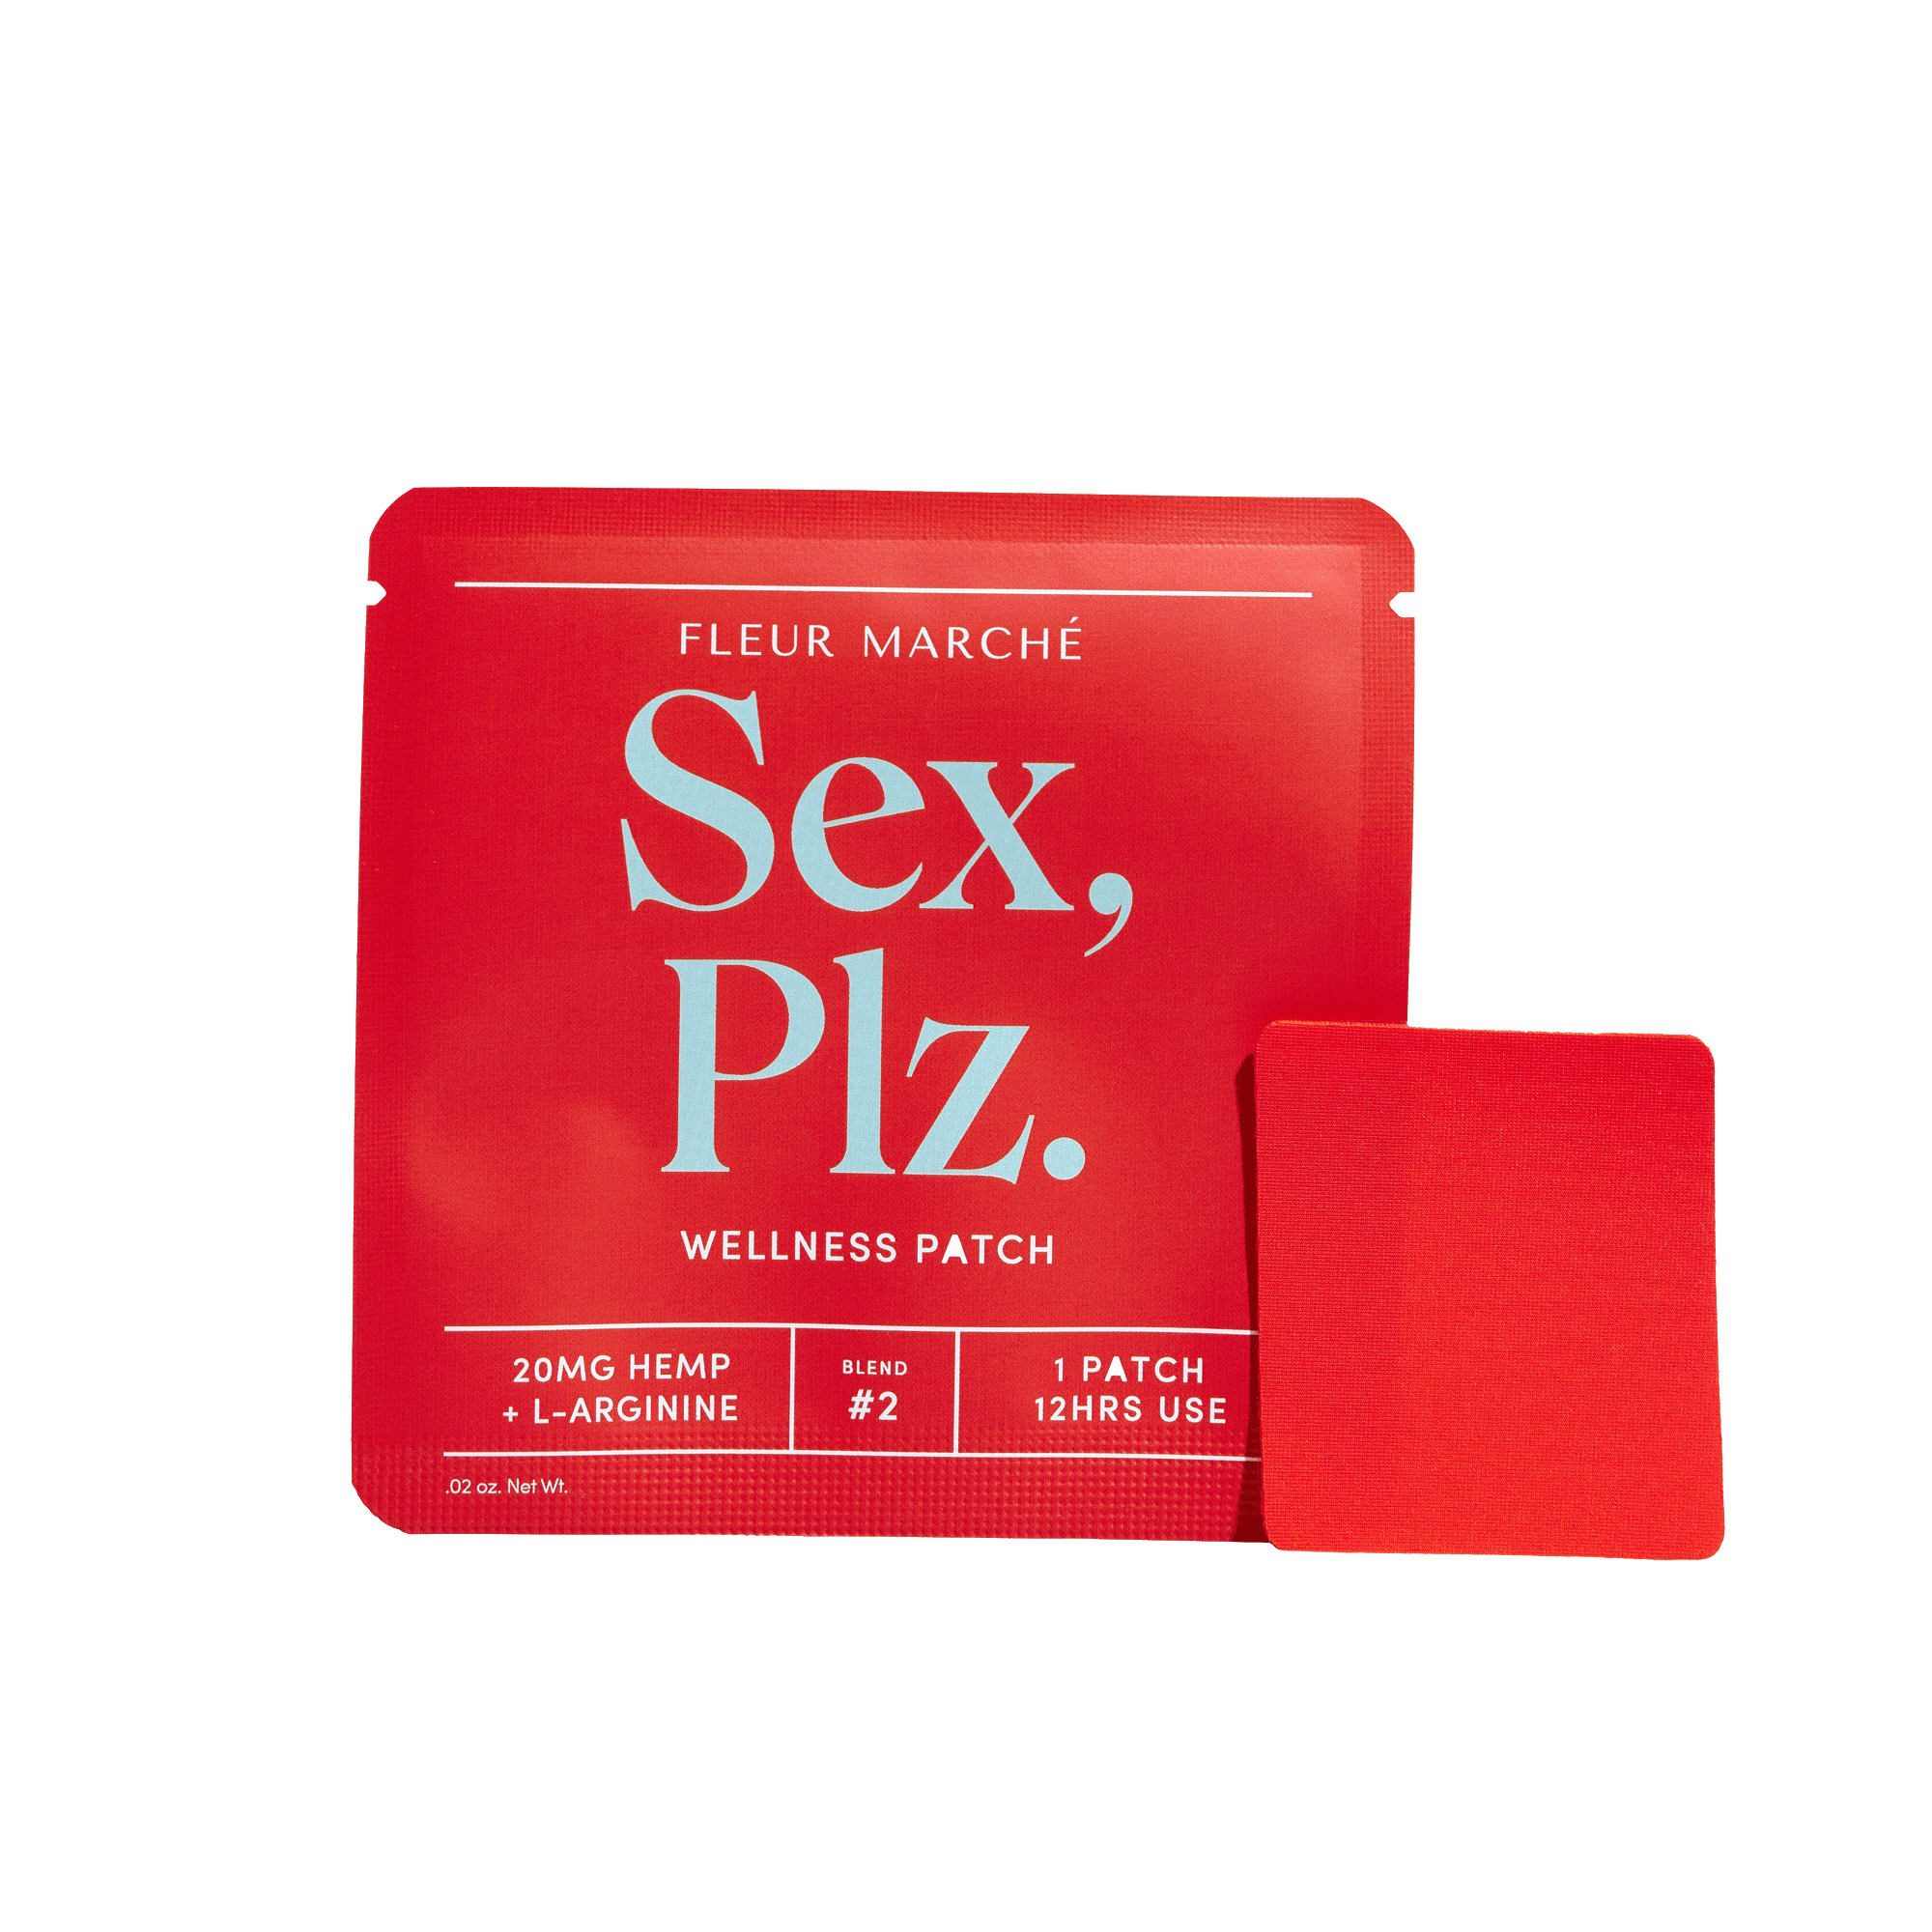 Sex Plz. patch and package